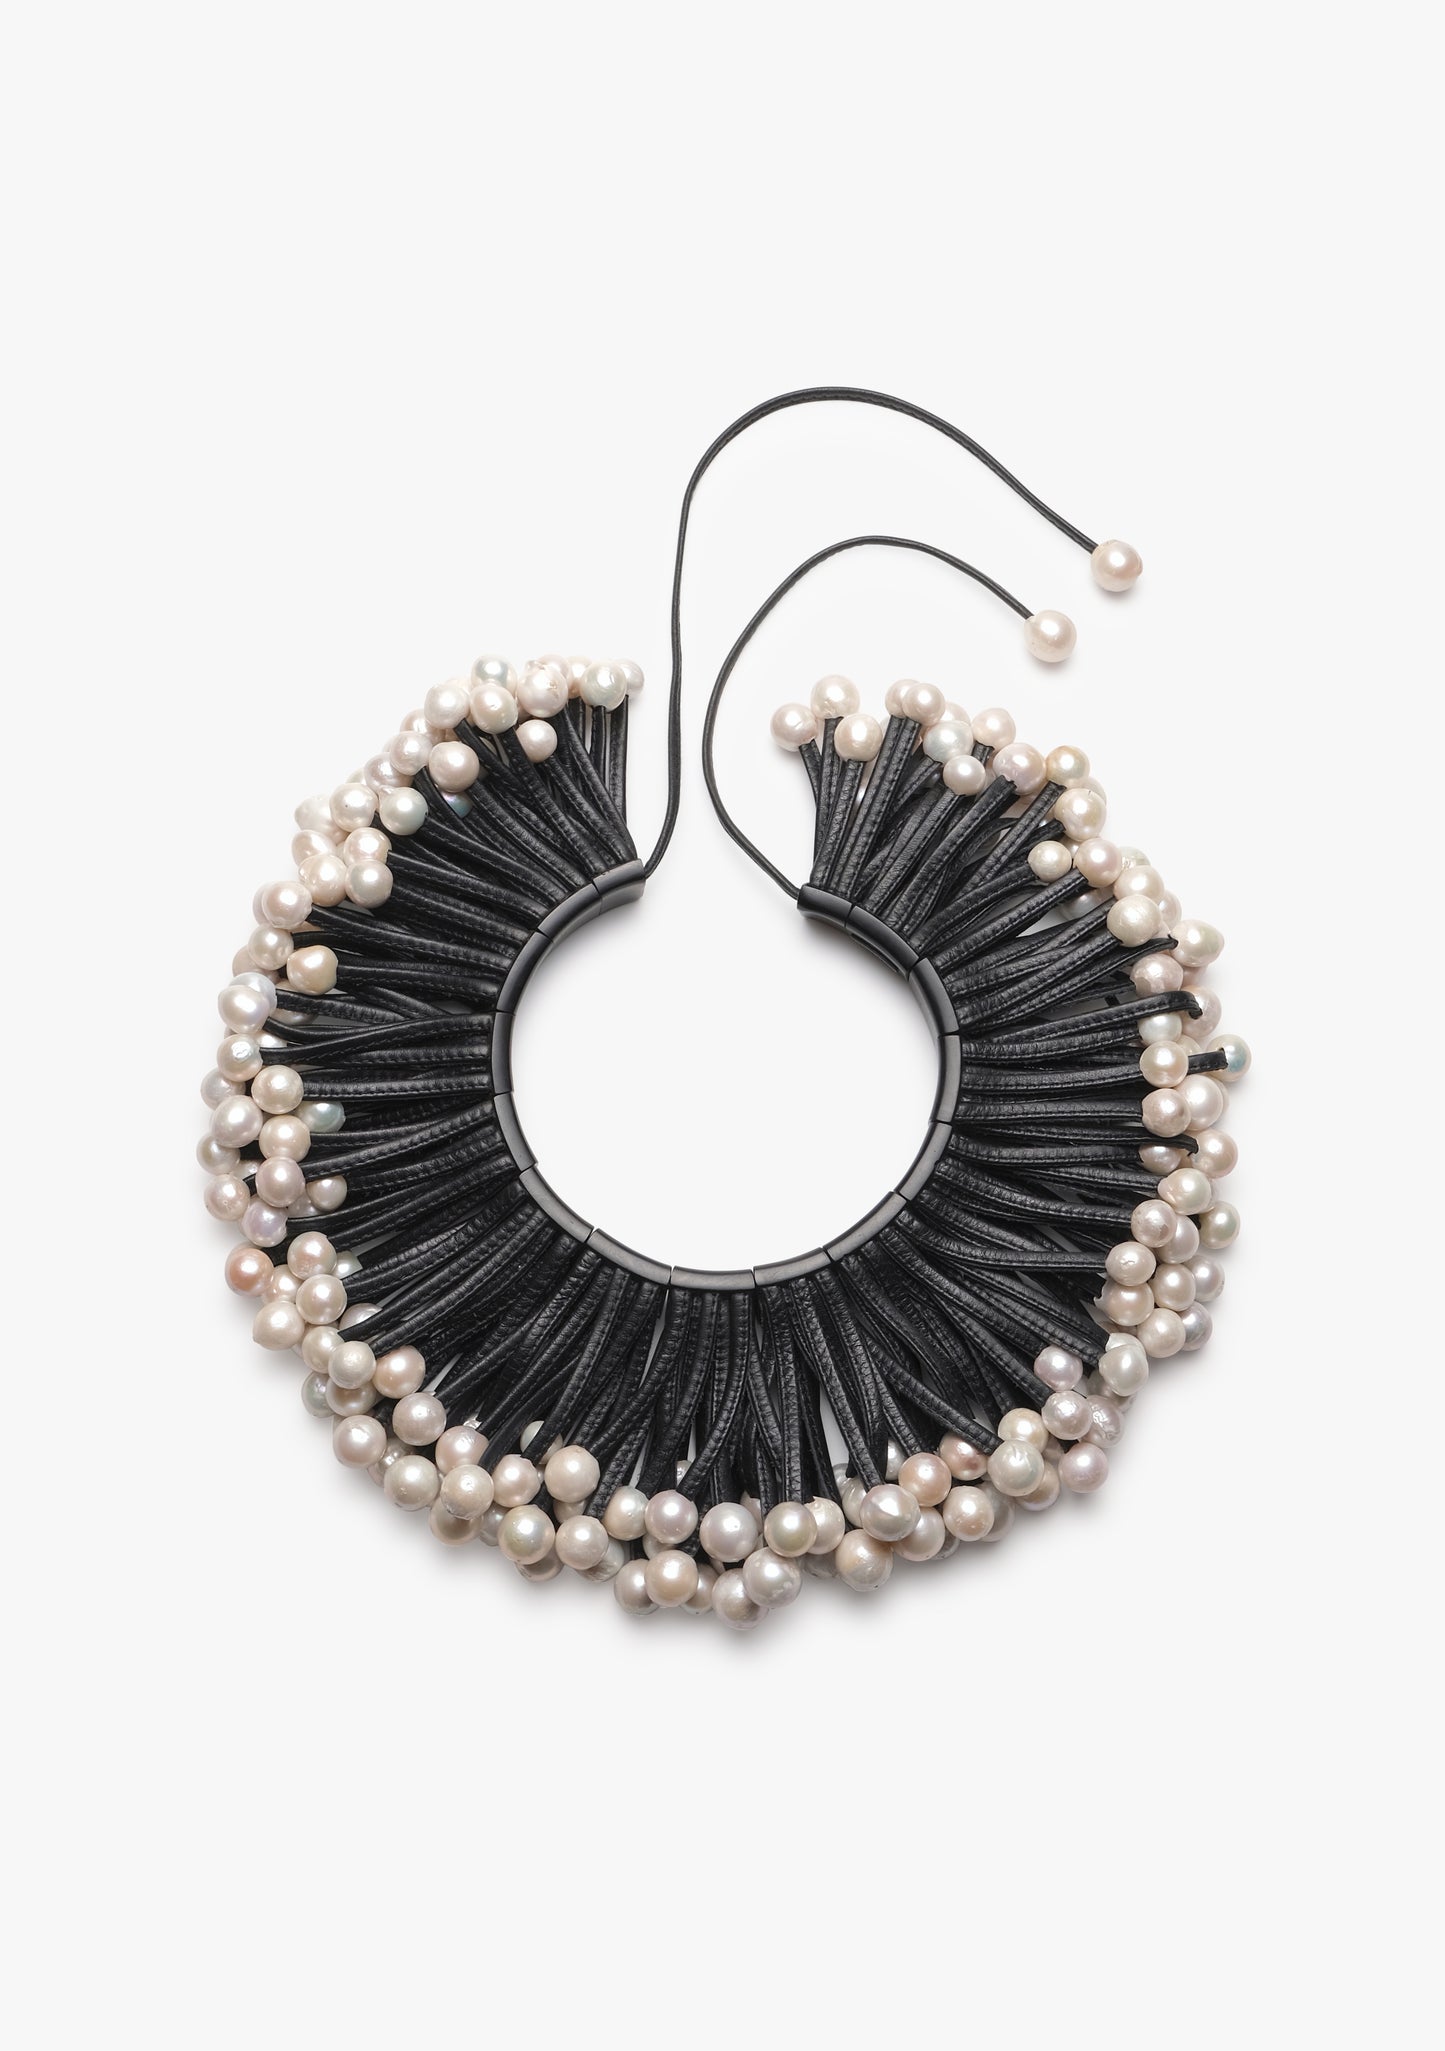 Necklace: showpiece of pearls, leather, ebony